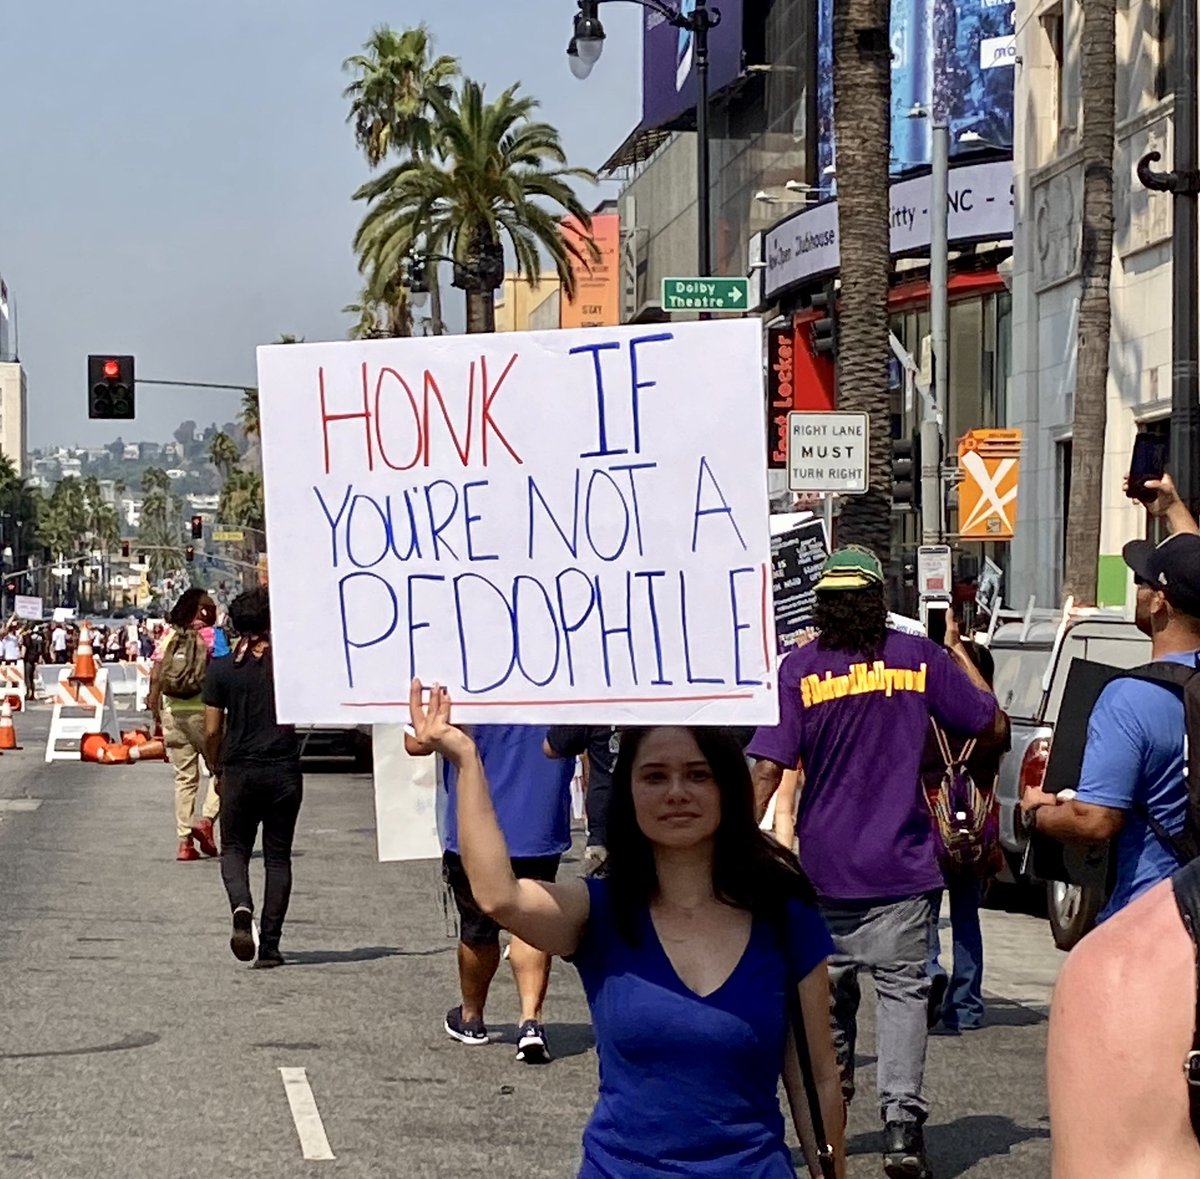 More signs from today’s QAnon rally, where hundreds of protesters marched down the Hollywood Walk of Fame in 93° heat chanting things like “kill all pedophiles”